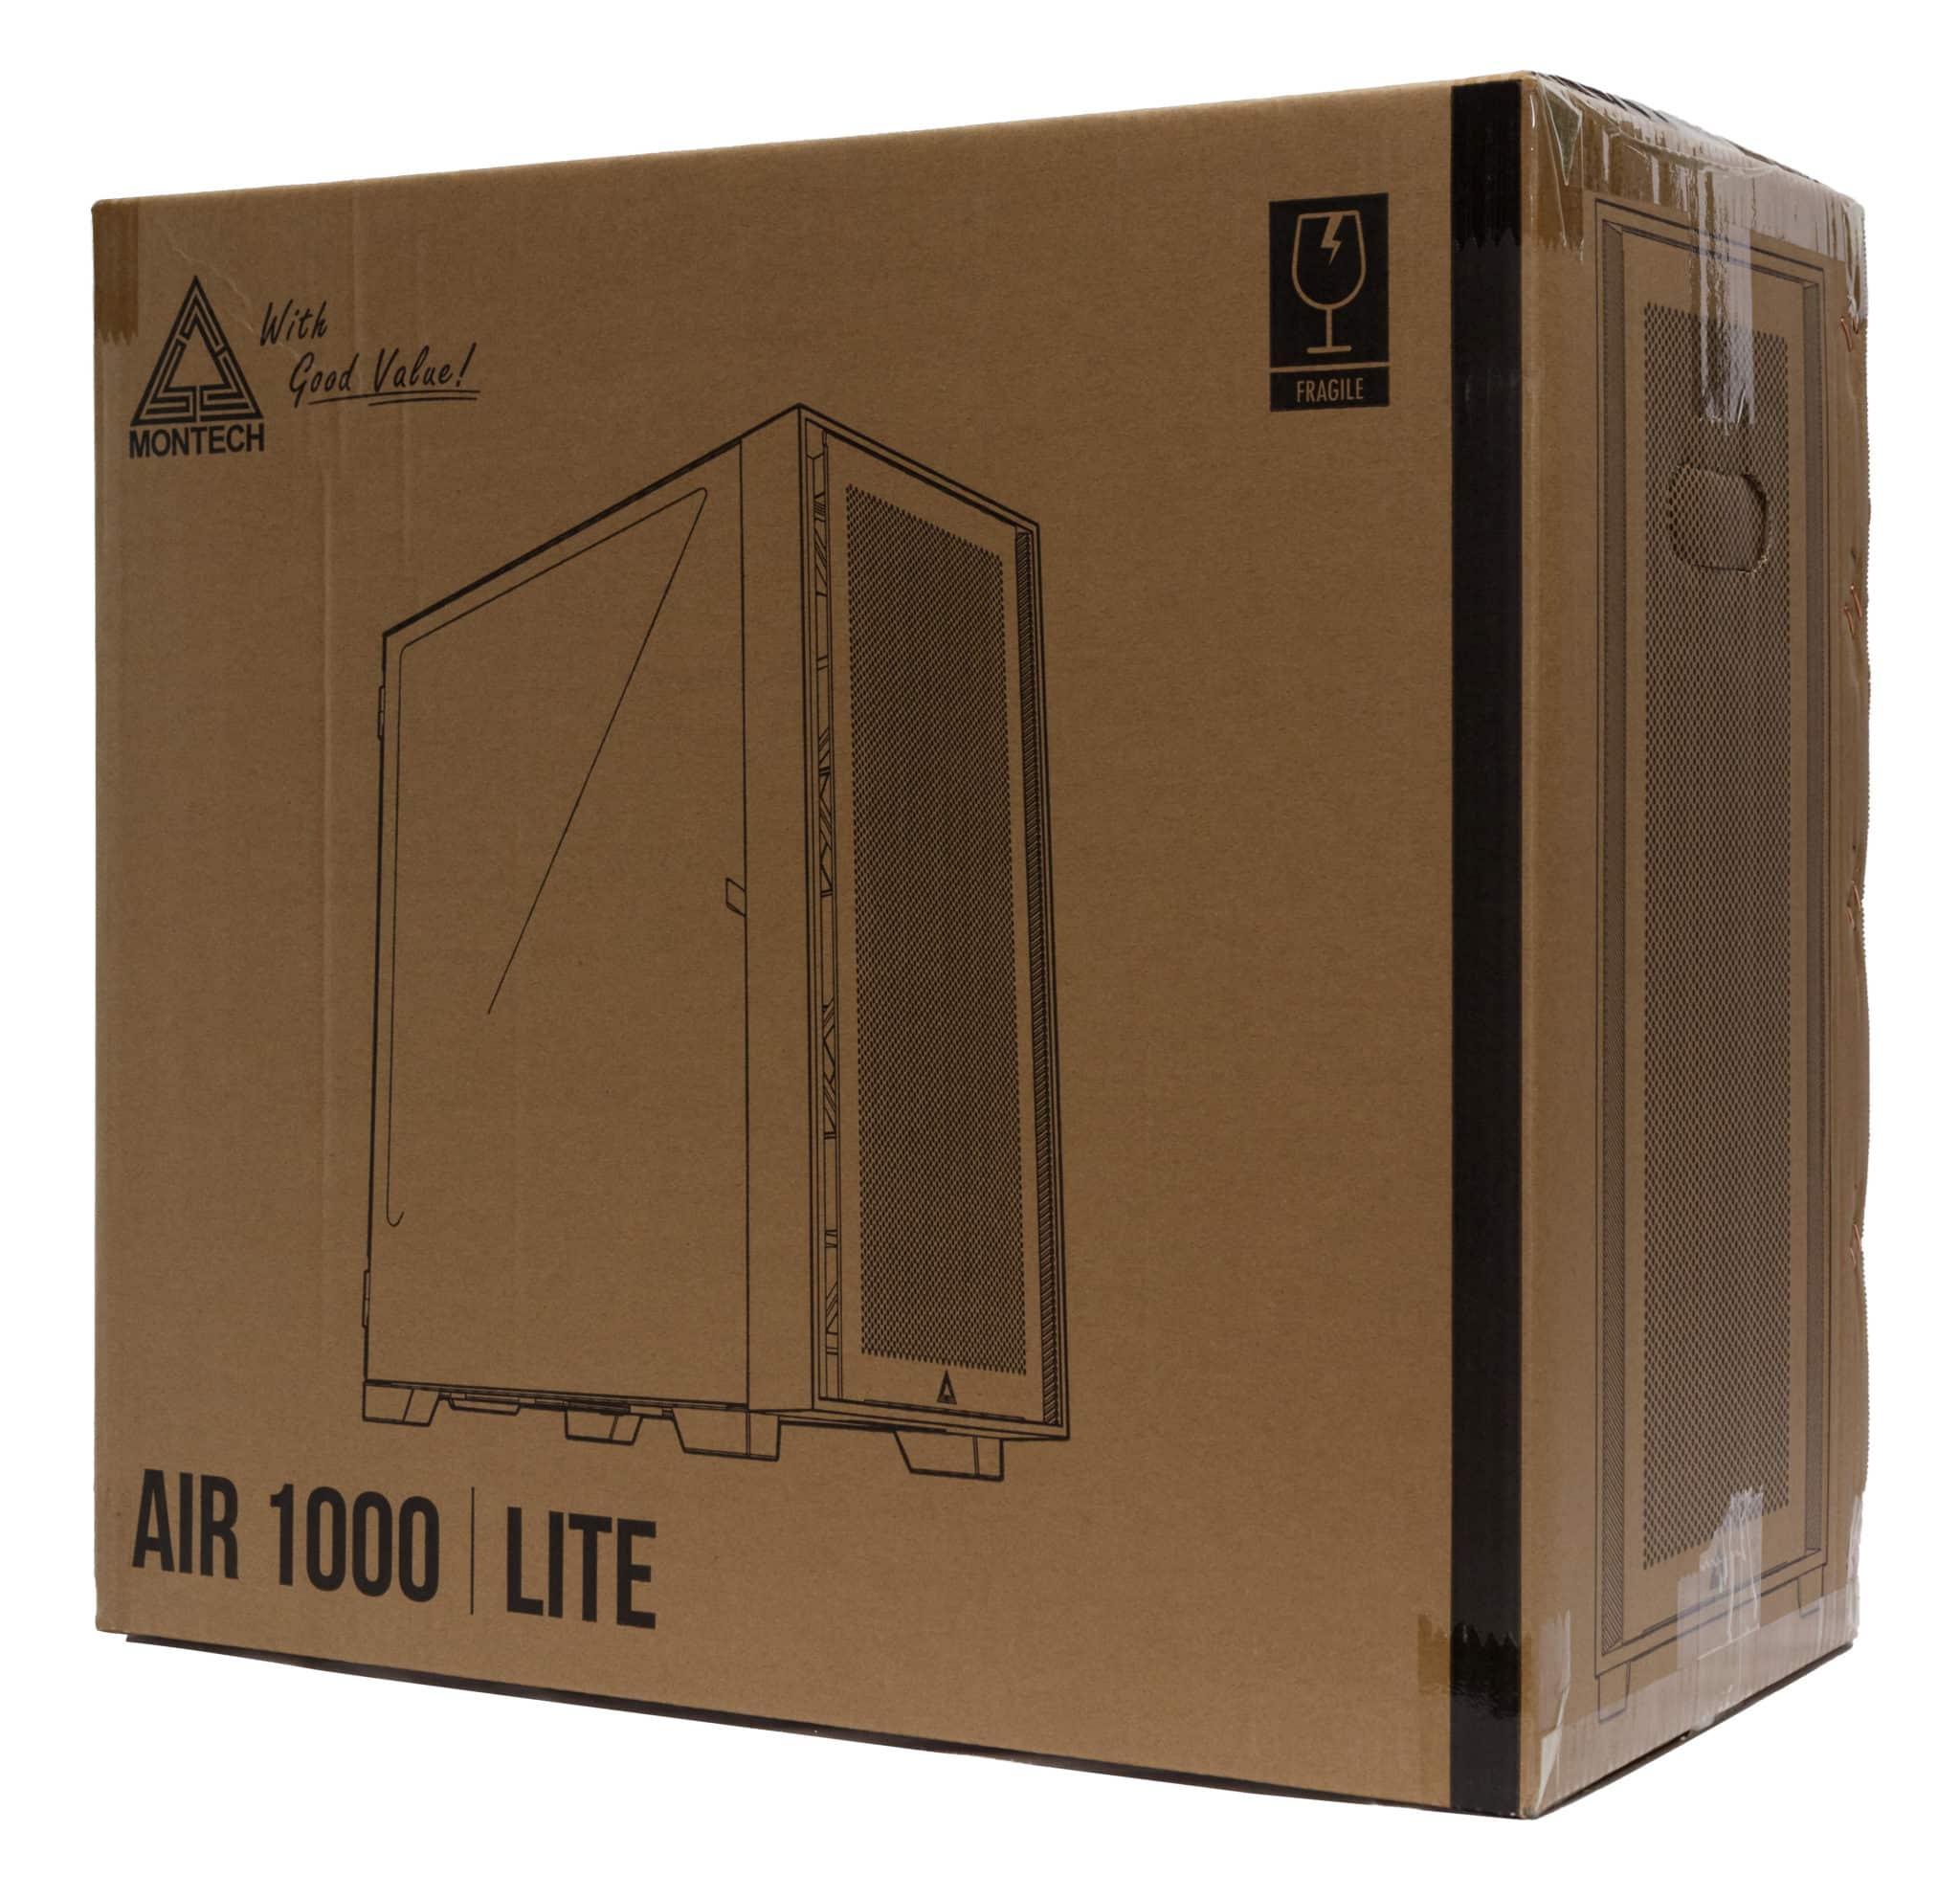 MONTECH AIR 1000 LITE Case Front of Box Angled